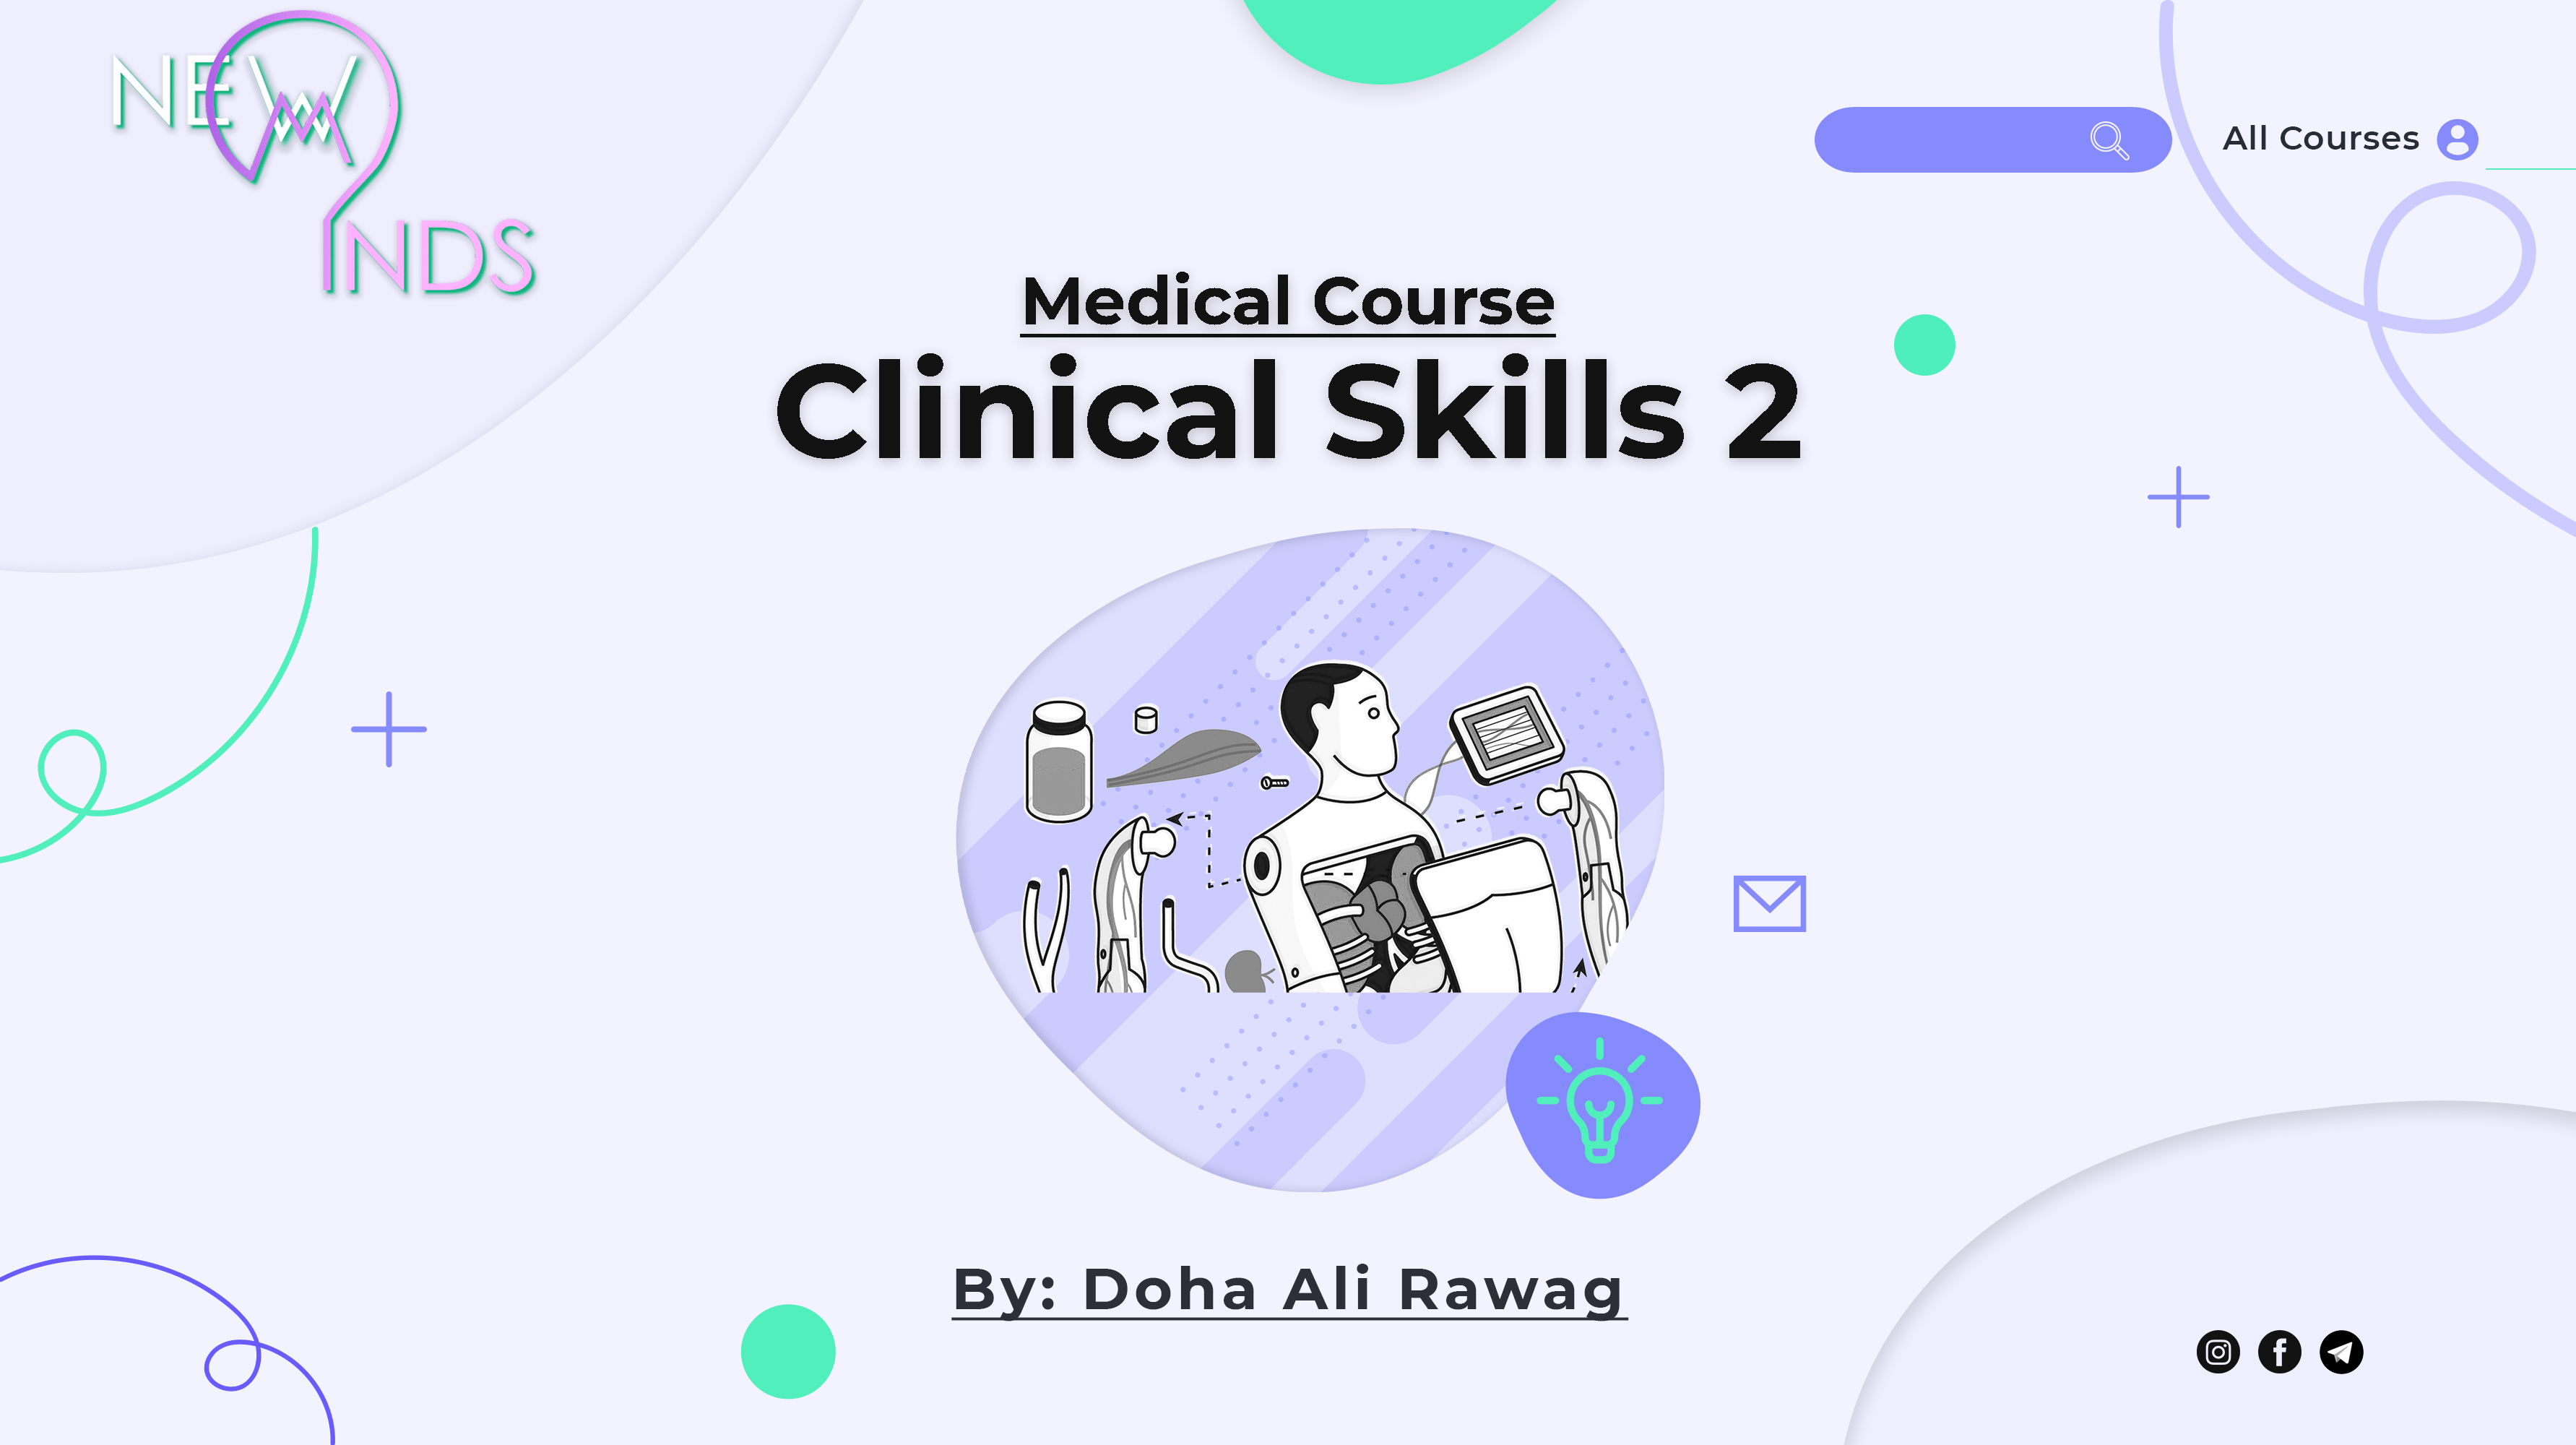 Clinical skills 2 course